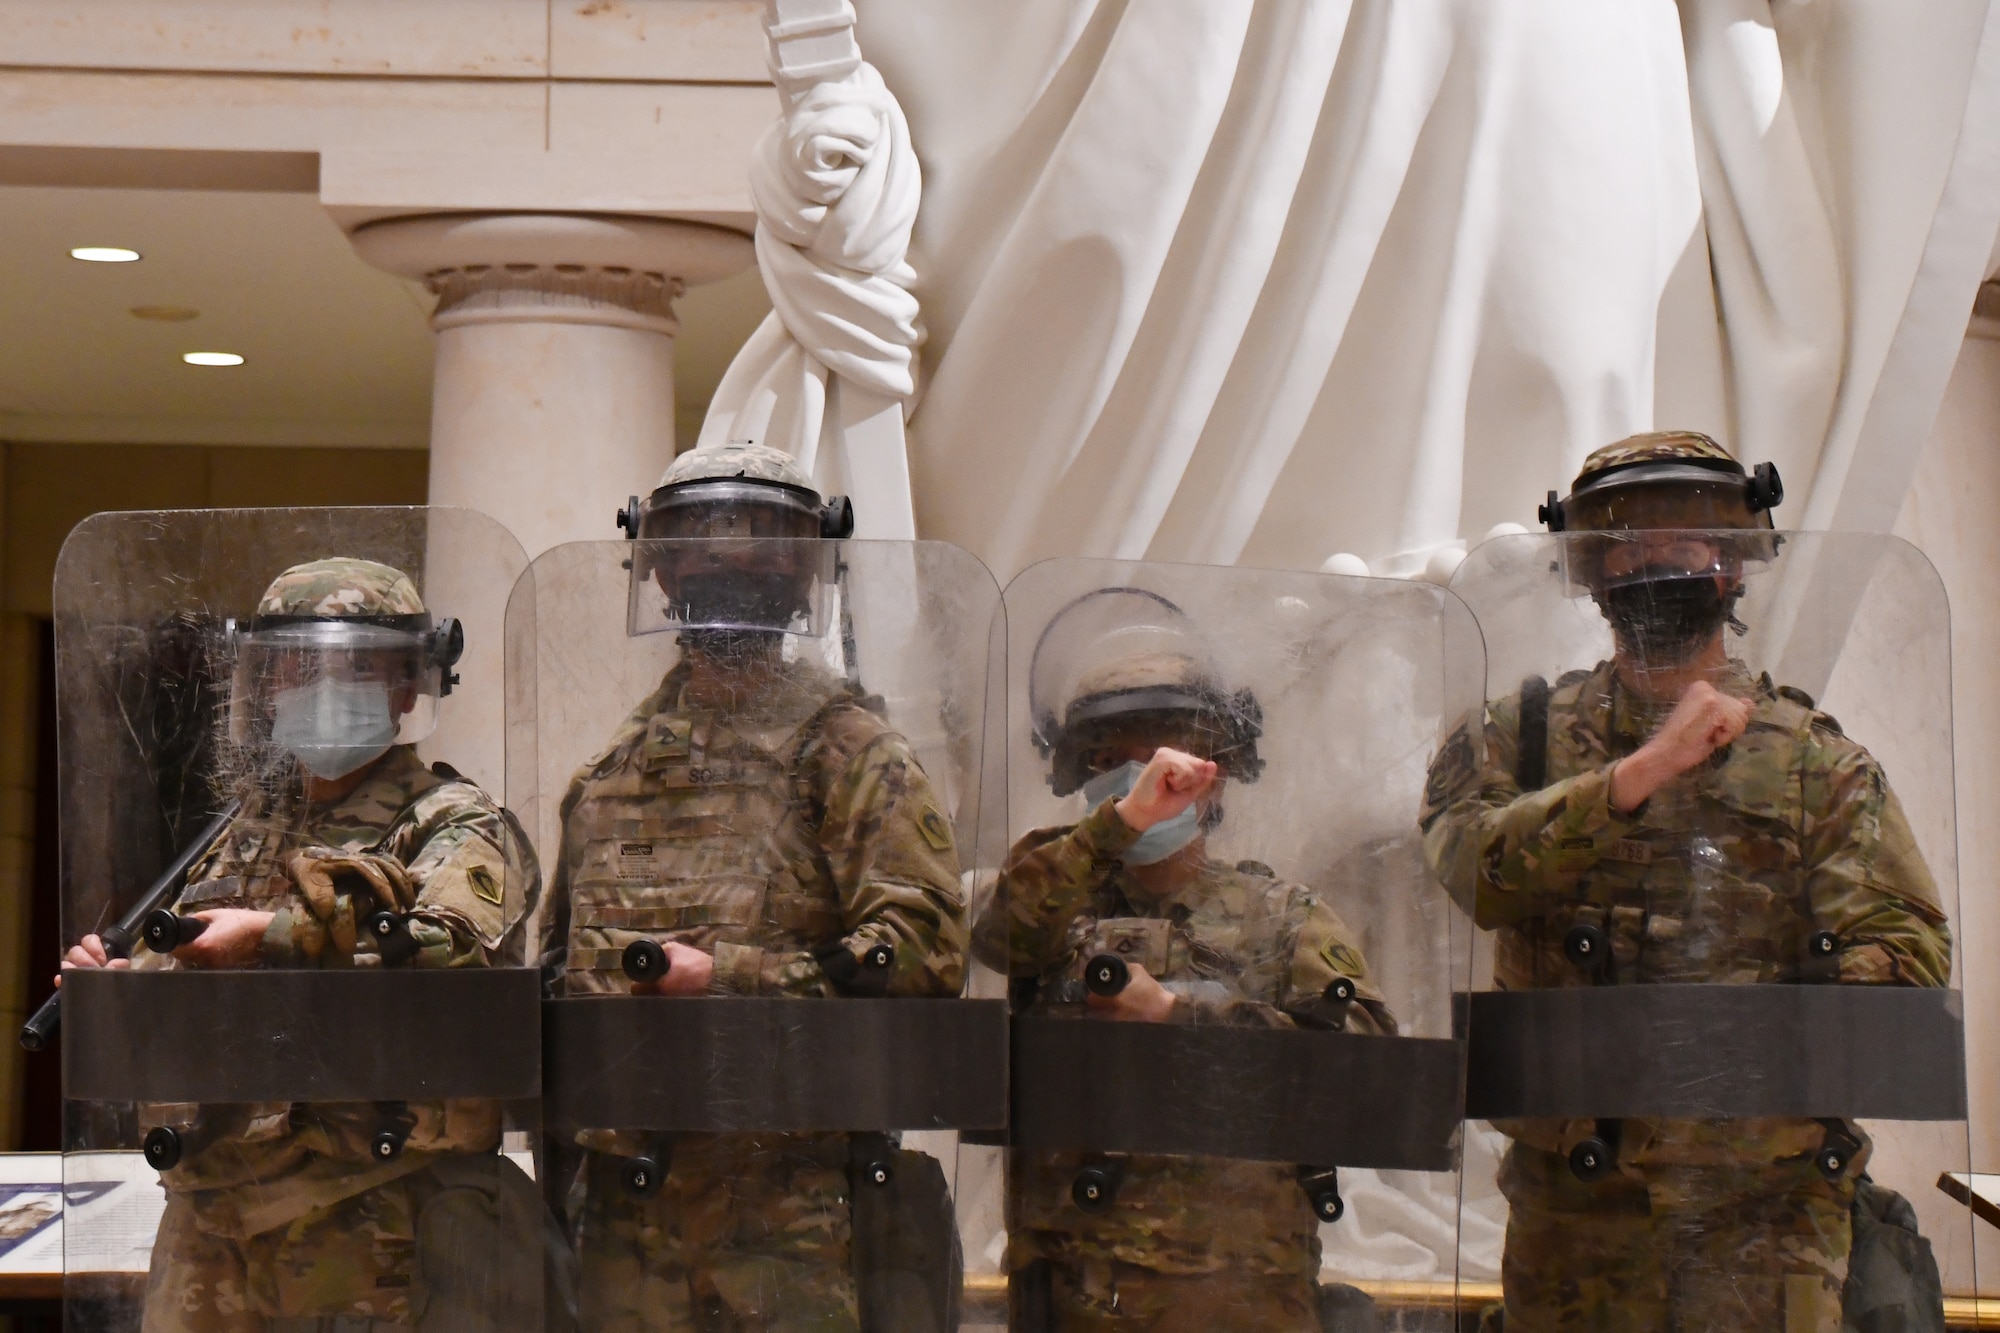 Massachusetts Army and Air National Guardsmen pose for a photo in the Capitol building in Washington, D.C., April 27, 2021. Since January, Army and Air National Guard units from around the country have provided ongoing security, communication, medical, evacuation, logistical and safety support to capital civil authorities. (U.S. Air National Guard photo by Staff Sgt. Hanna Smith)